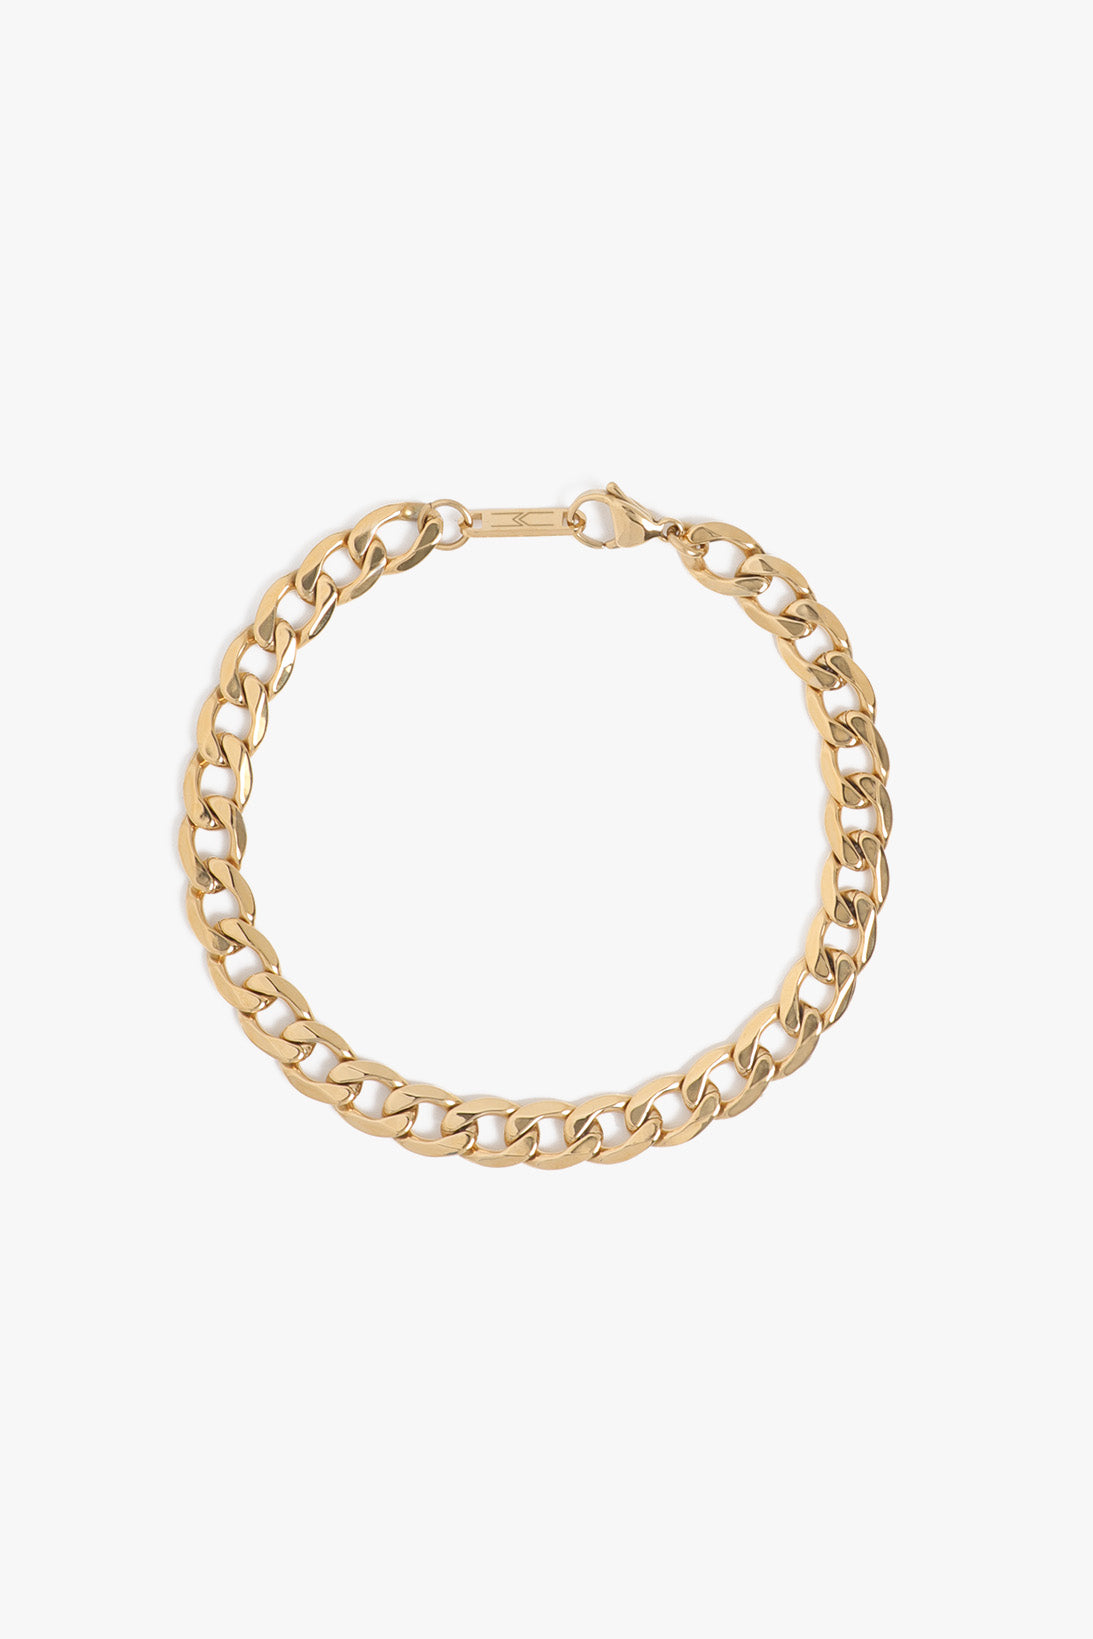 Marrin Costello Jewelry Kings Anklet flat cuban link chain bracelet with lobster clasp closure. Waterproof, sustainable, hypoallergenic. 14k gold plated stainless steel.